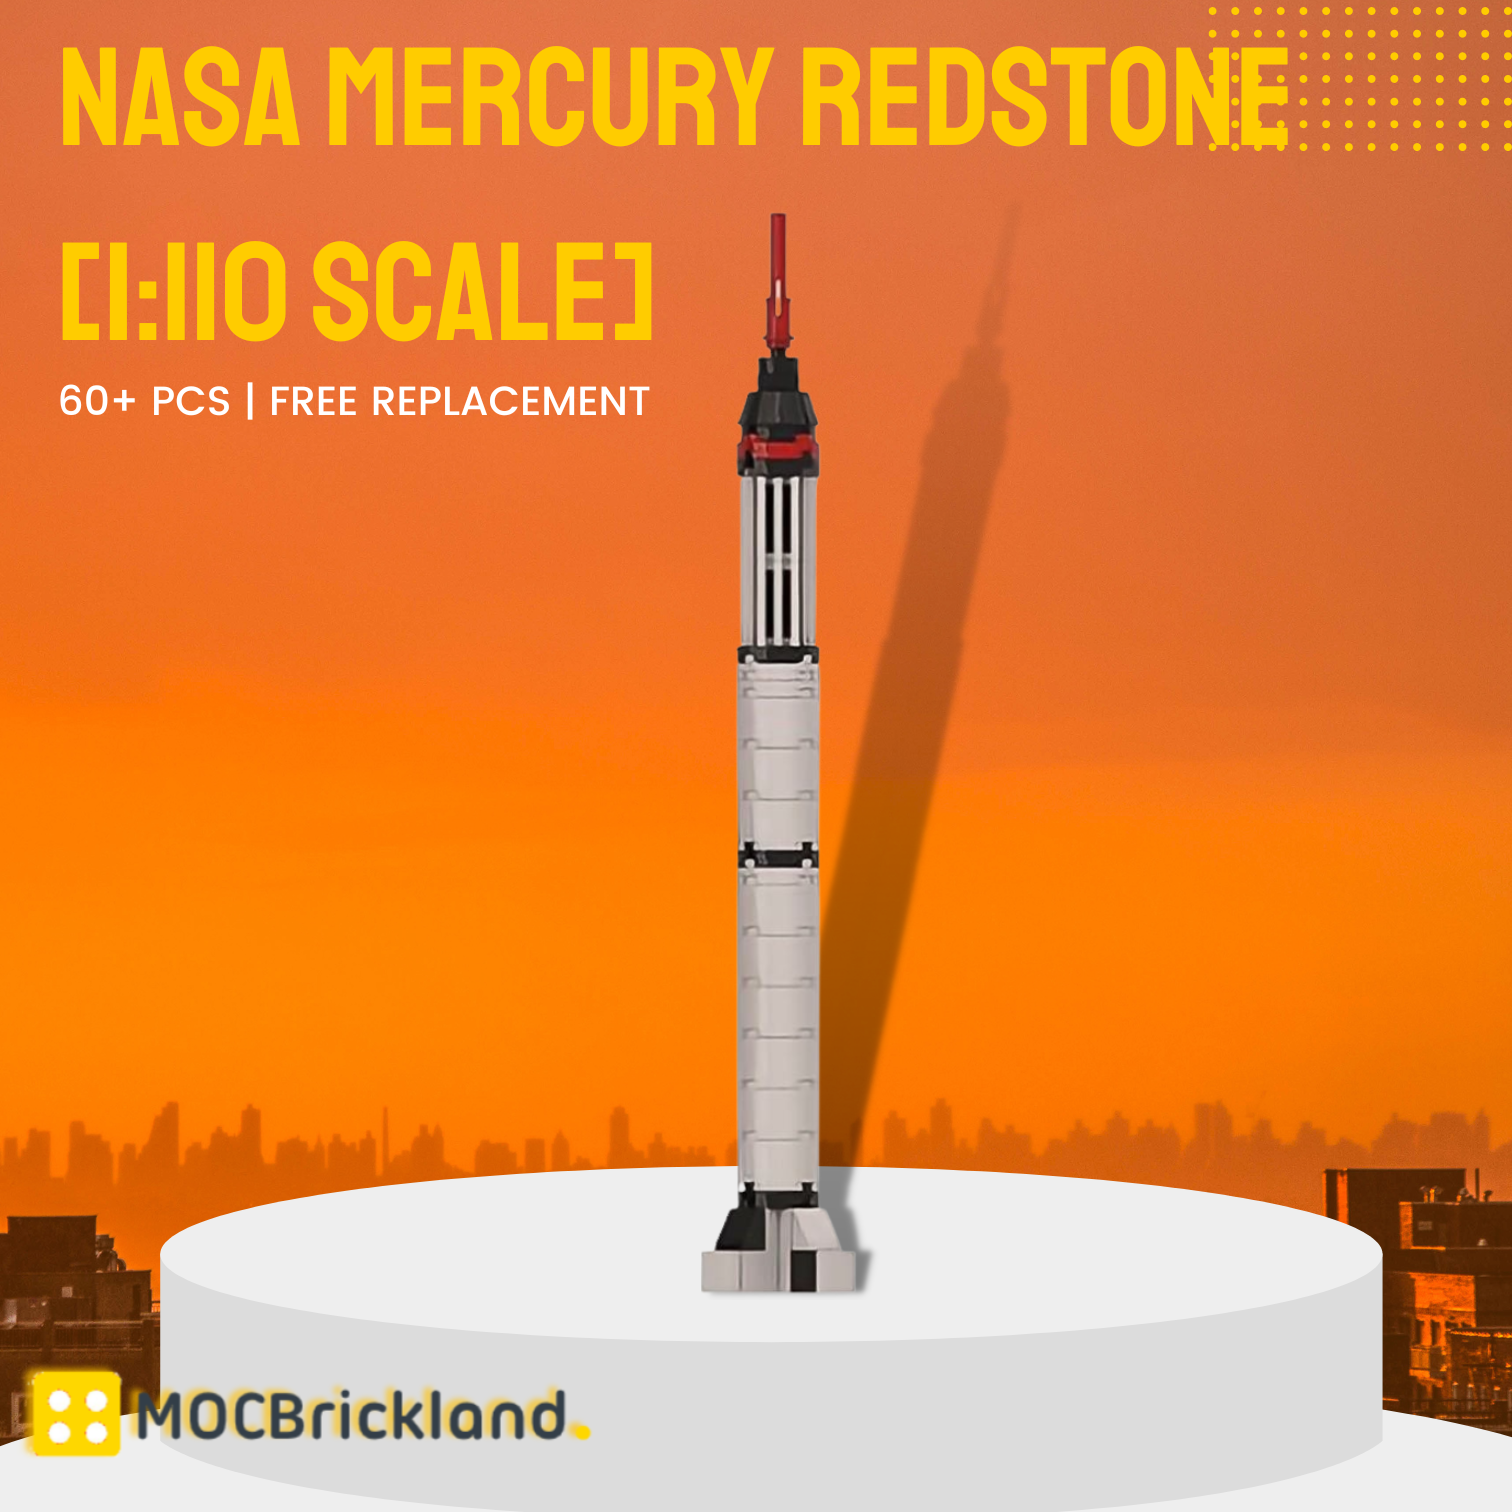 NASA Mercury Redstone [1:110 Scale] MOC-79193 Space With 60 Pieces